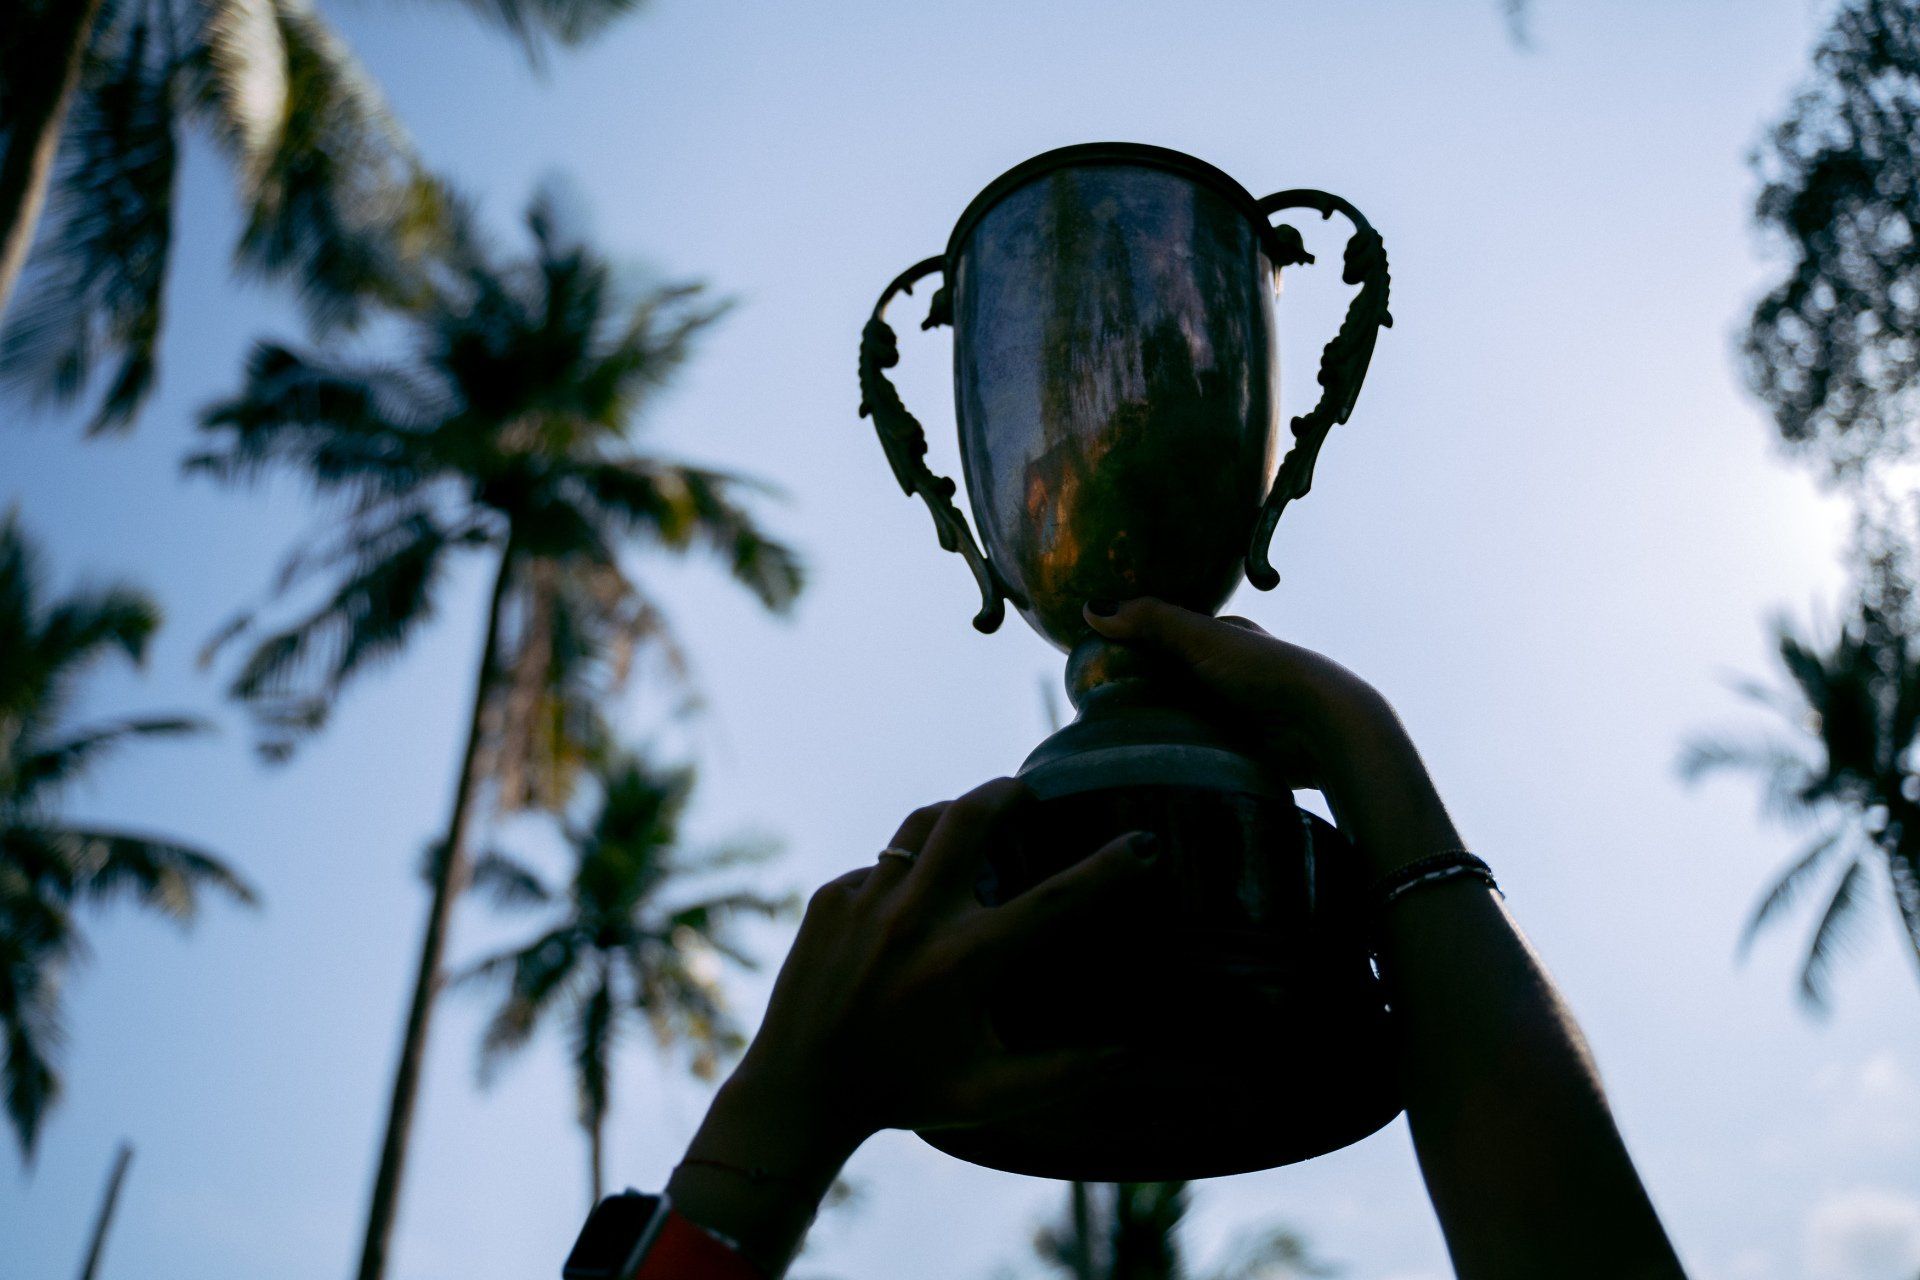 a person is holding a trophy in front of palm trees